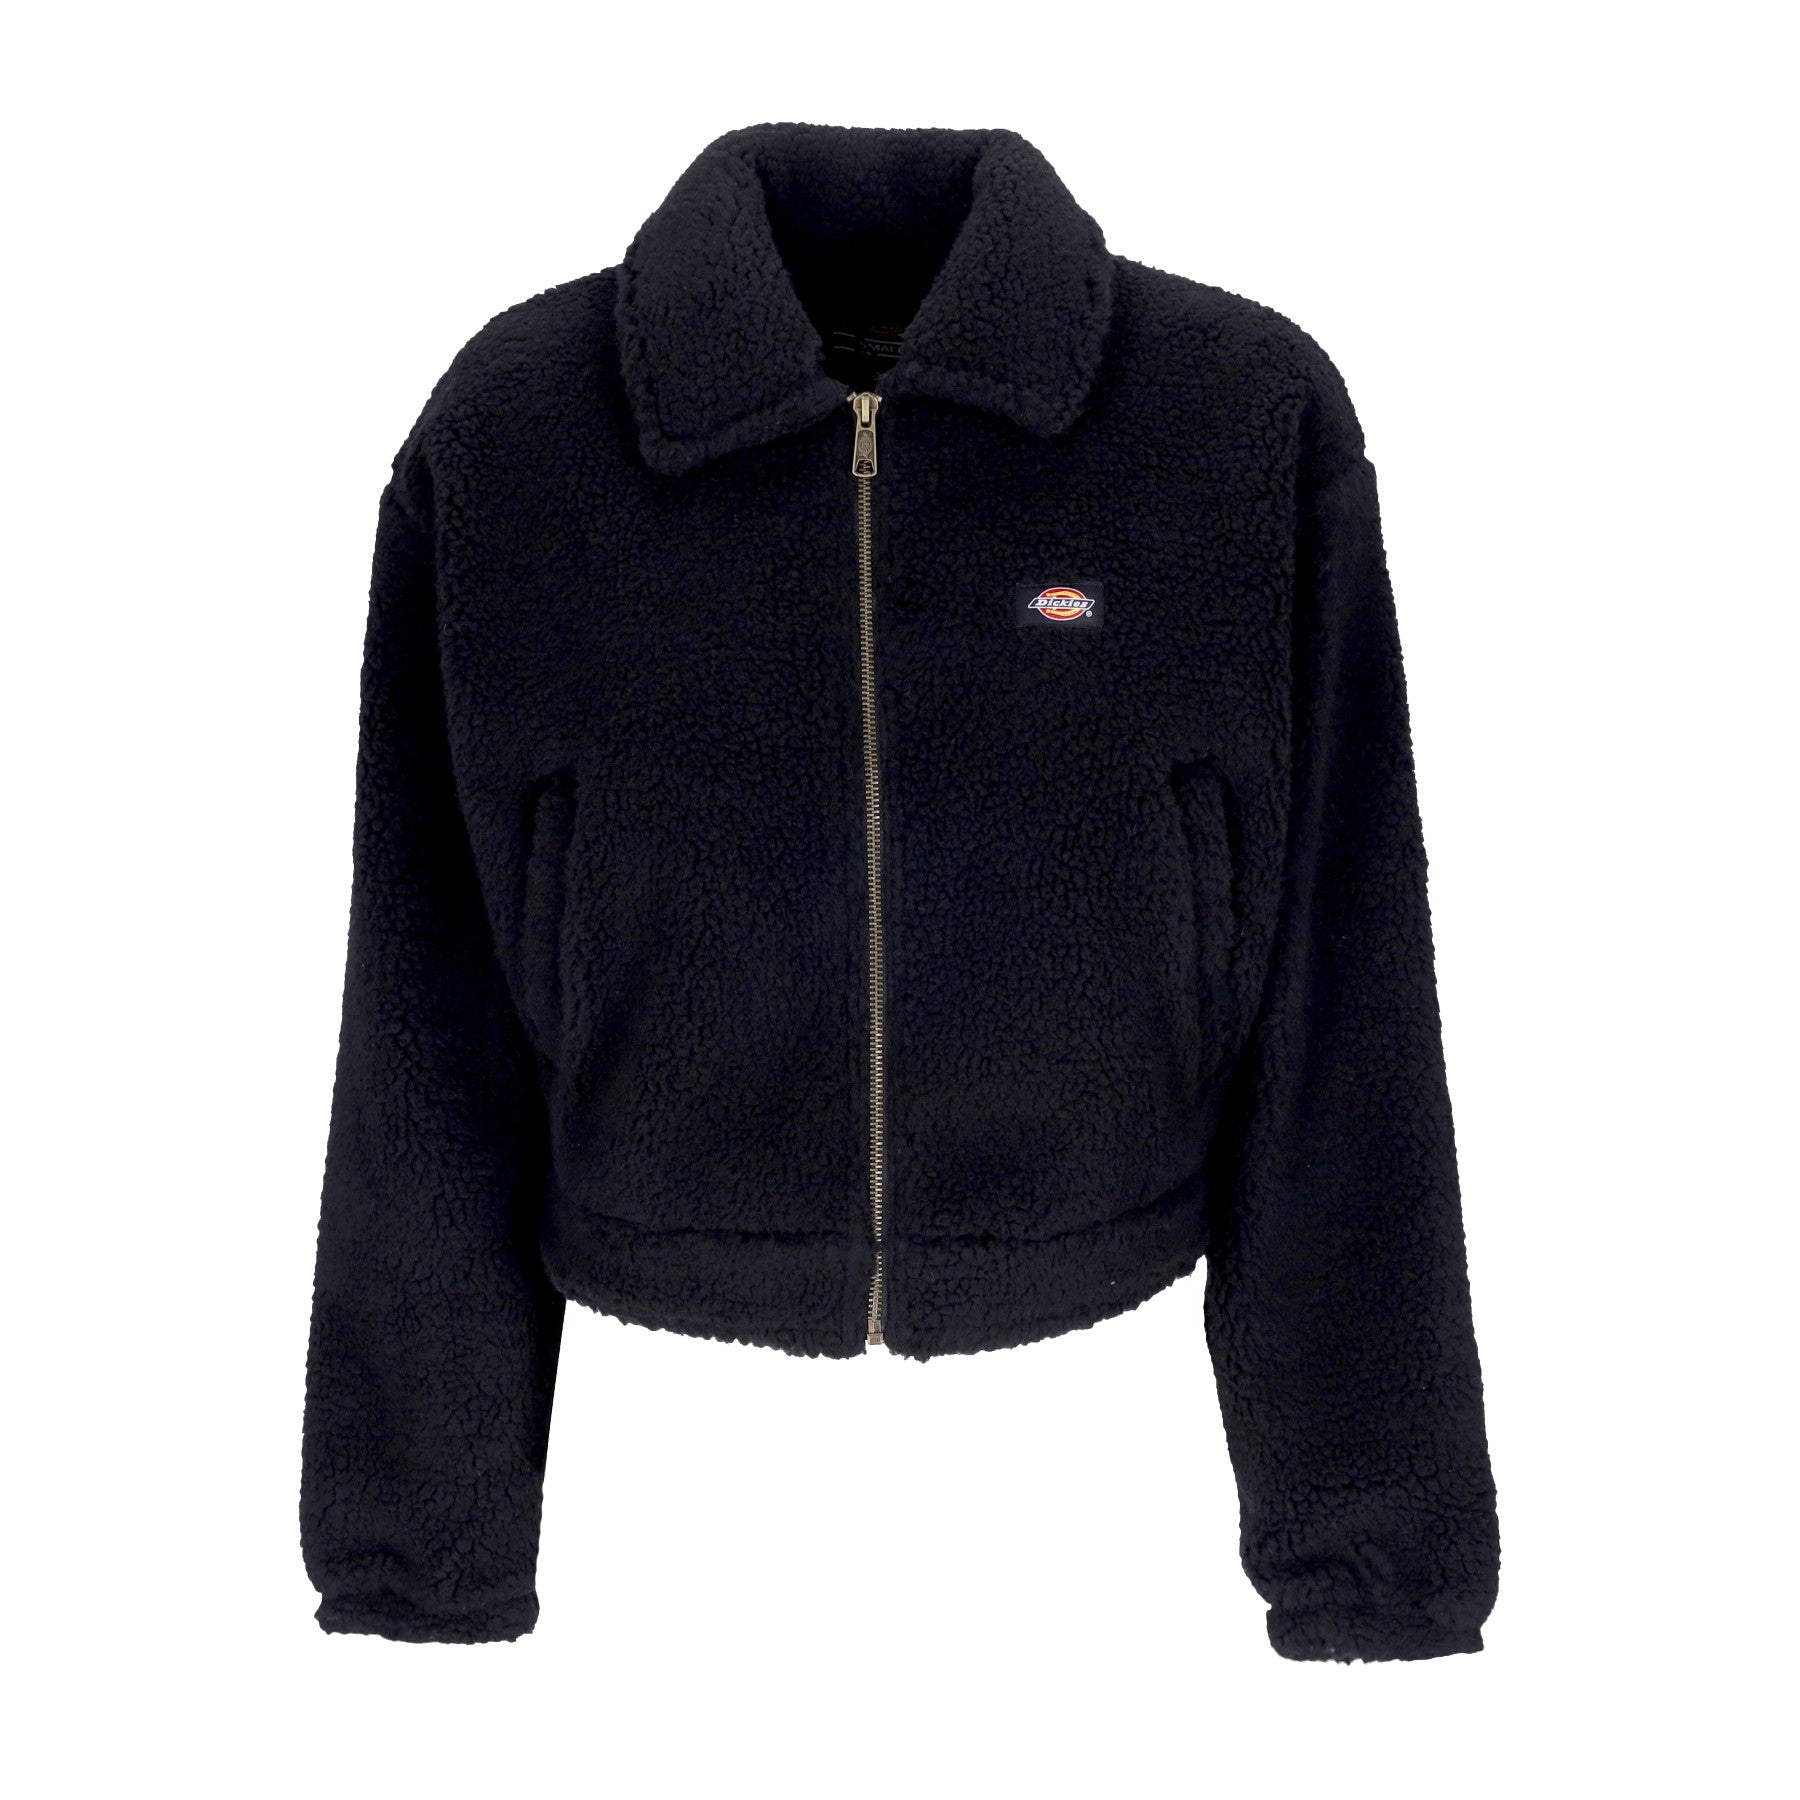 Dickies, Orsetto Donna Palmerdale Jacket, Black